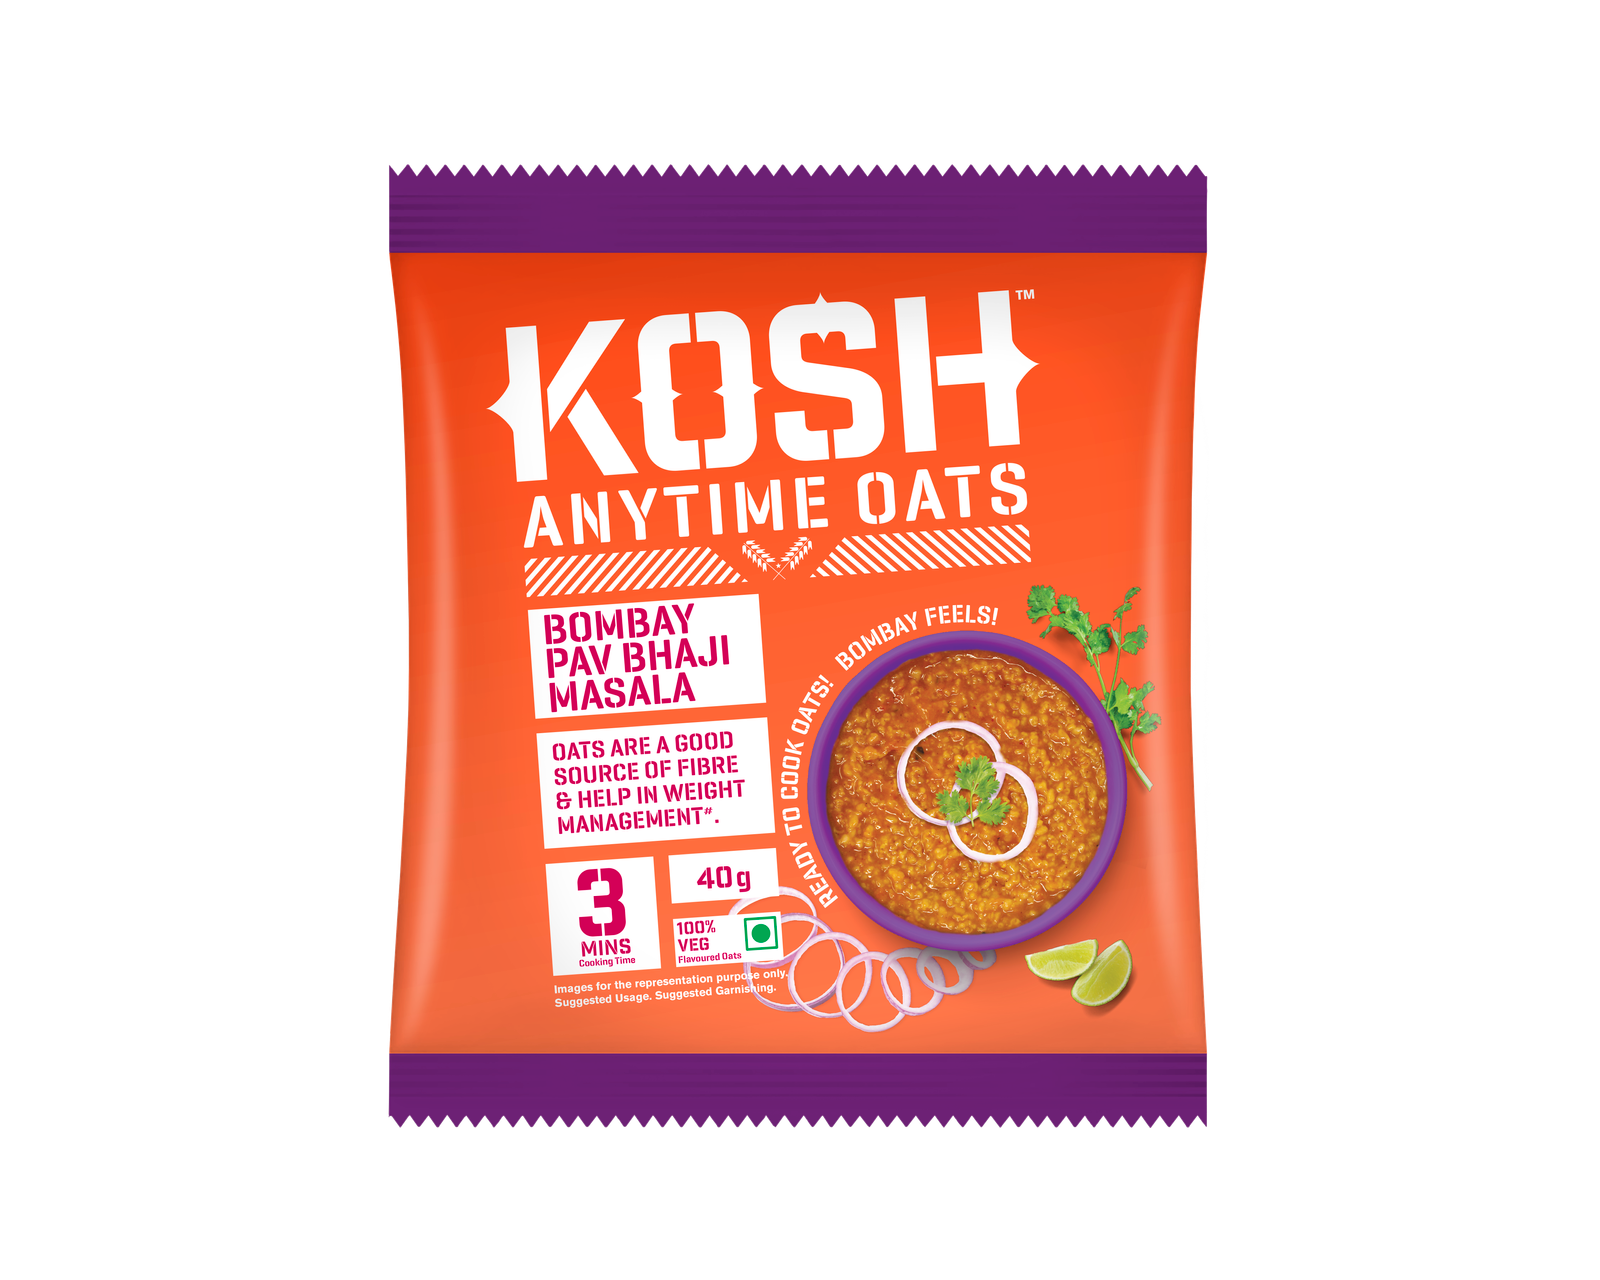 kosh-instant-oats-launches-a-new-range-with-three-new-flavors